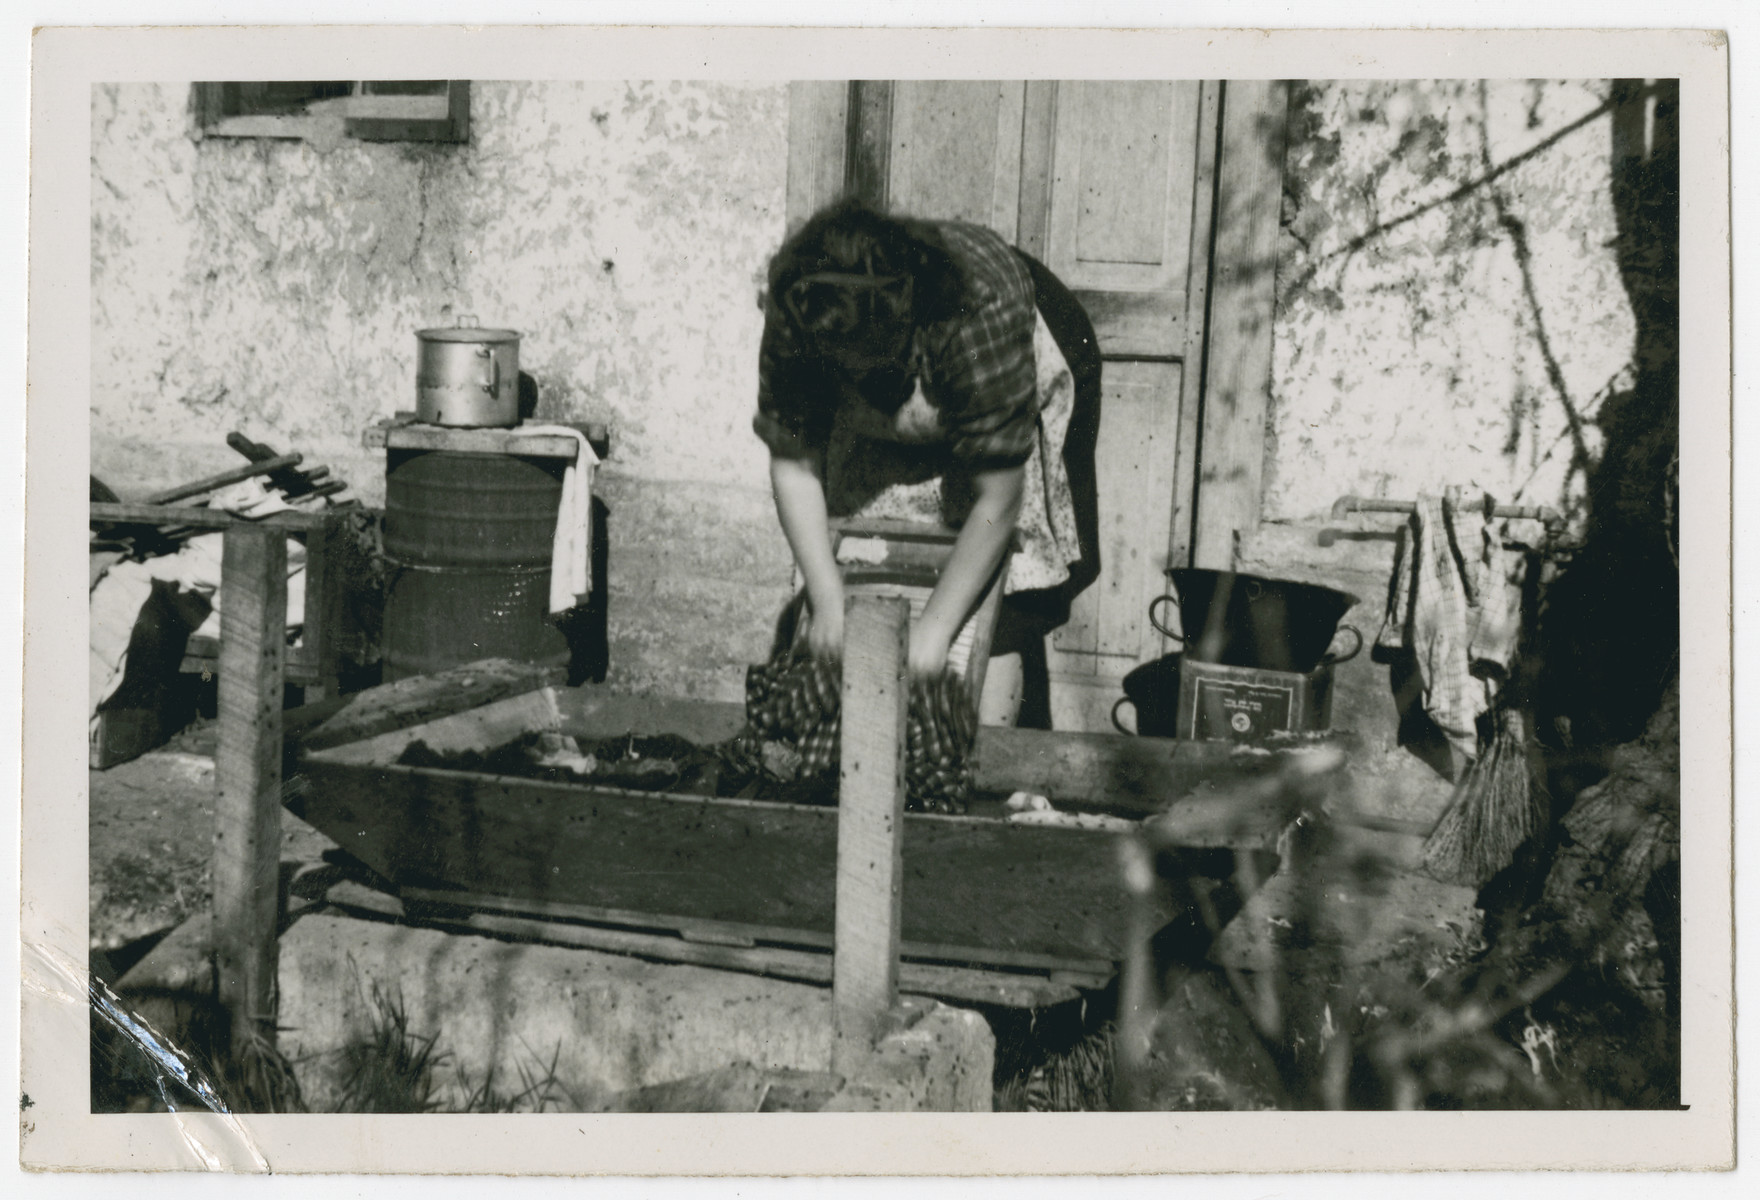 Photograph from an album entitled, "Hacshara Kidma Chile,"  documenting life on a postwar Shomer Hatzair Zionist agricultural collective in Chile.

A young woman washes clothing on a washboard. The inscription on the album page reads, "La Monja."